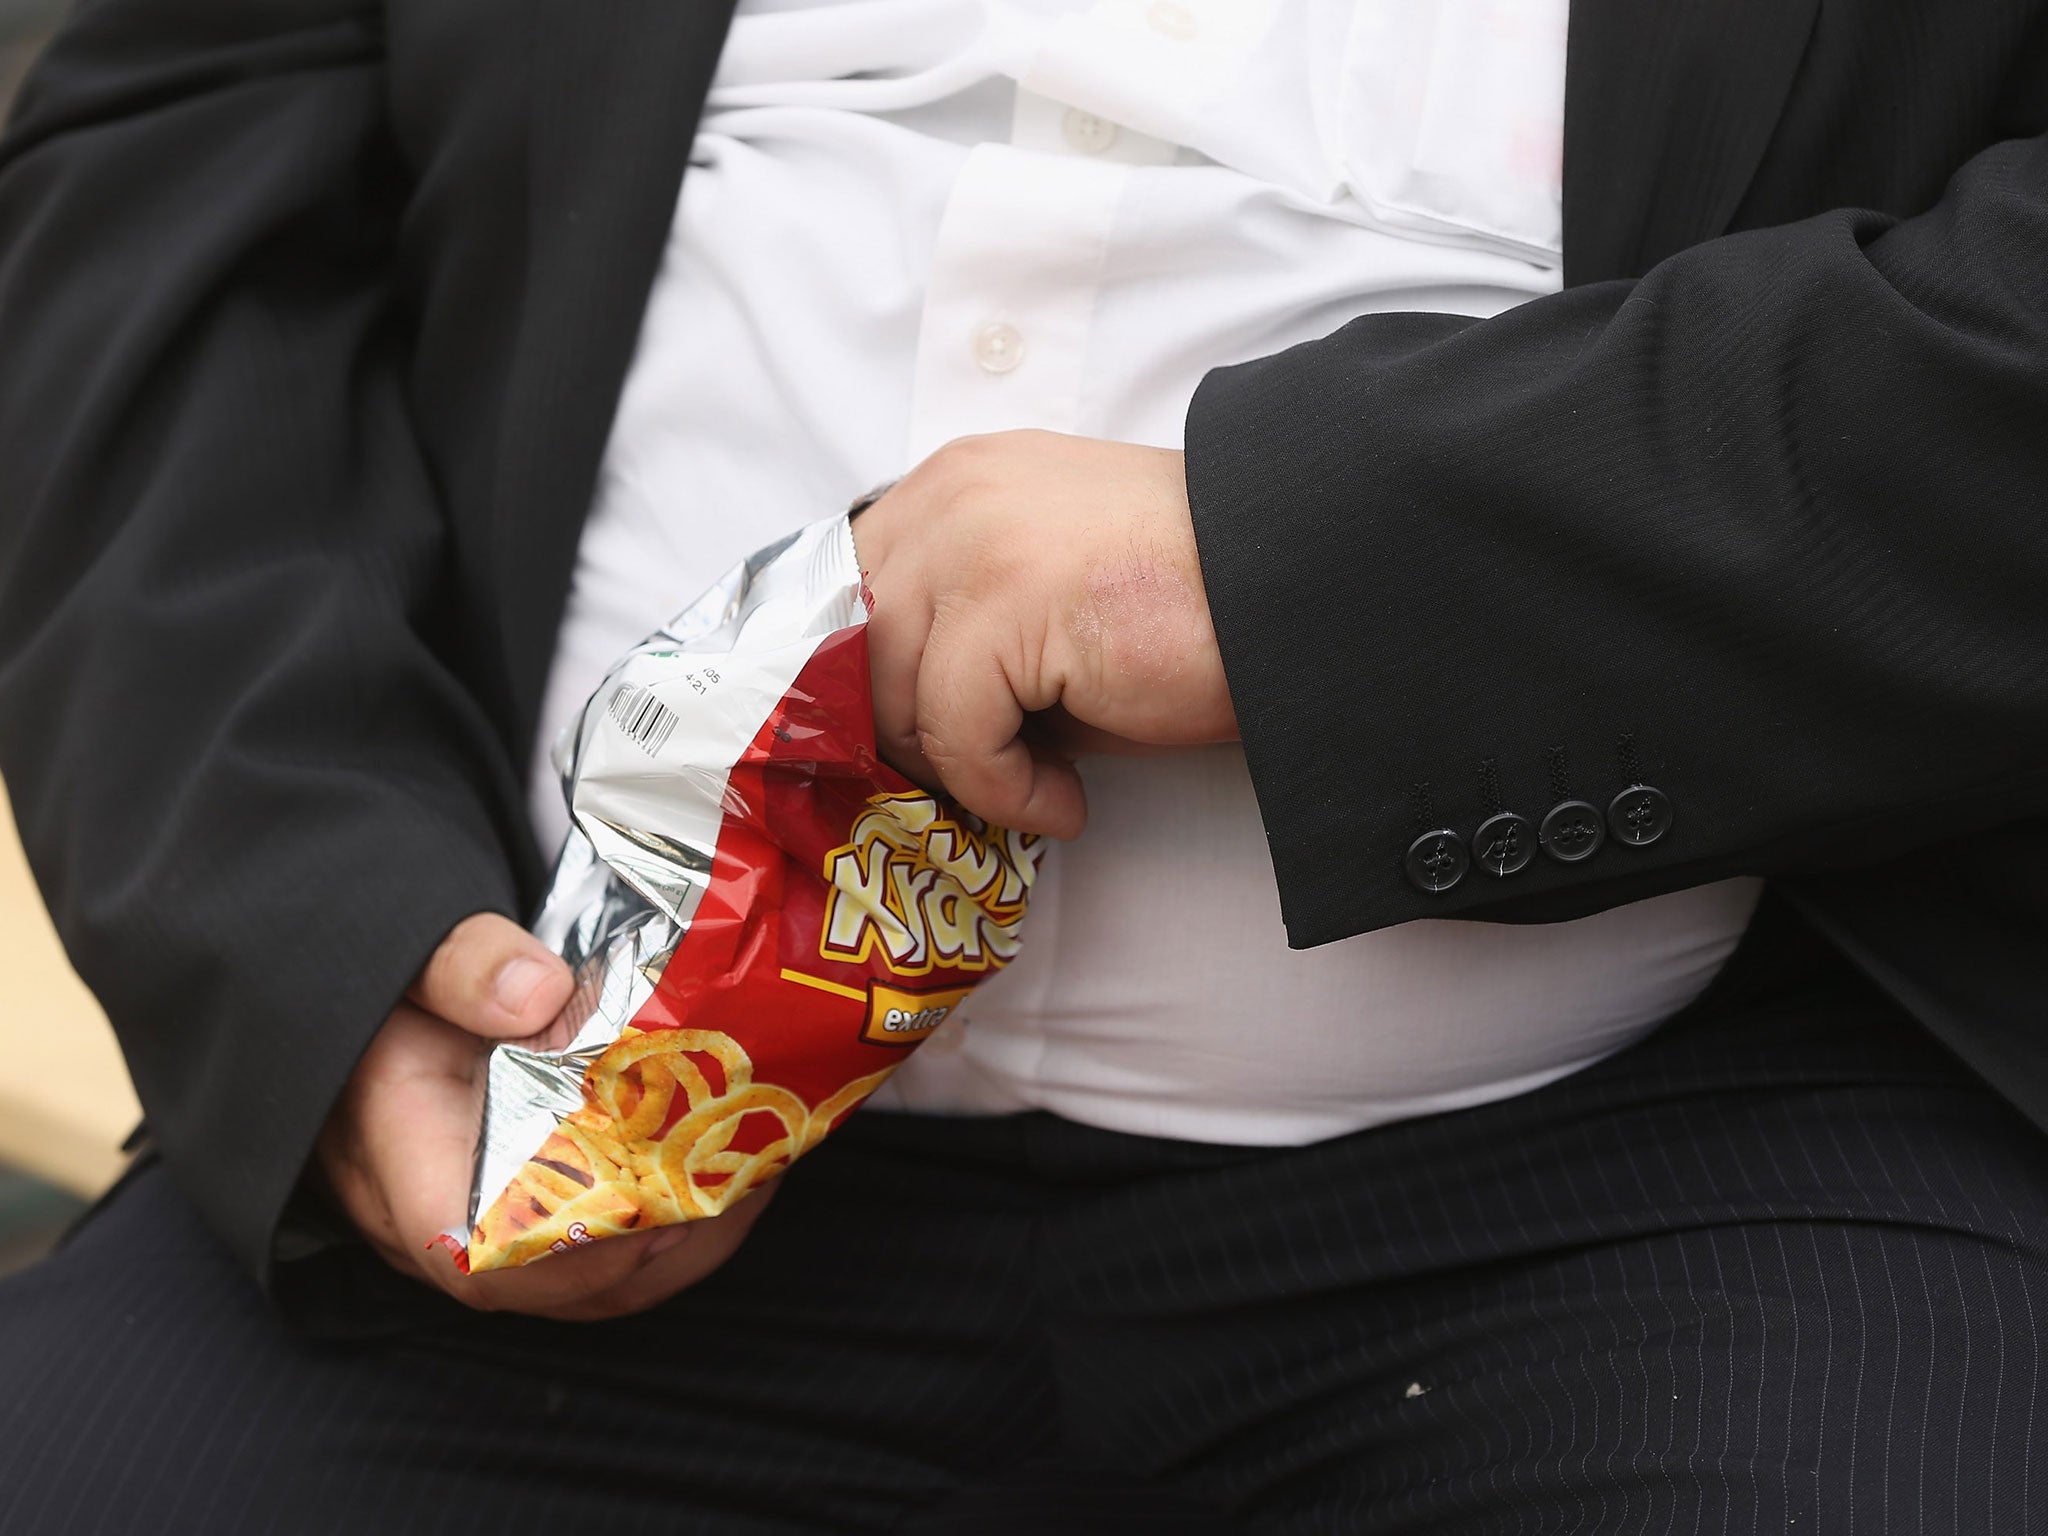 Being overweight and obesity has been closely linked to 10 common cancers